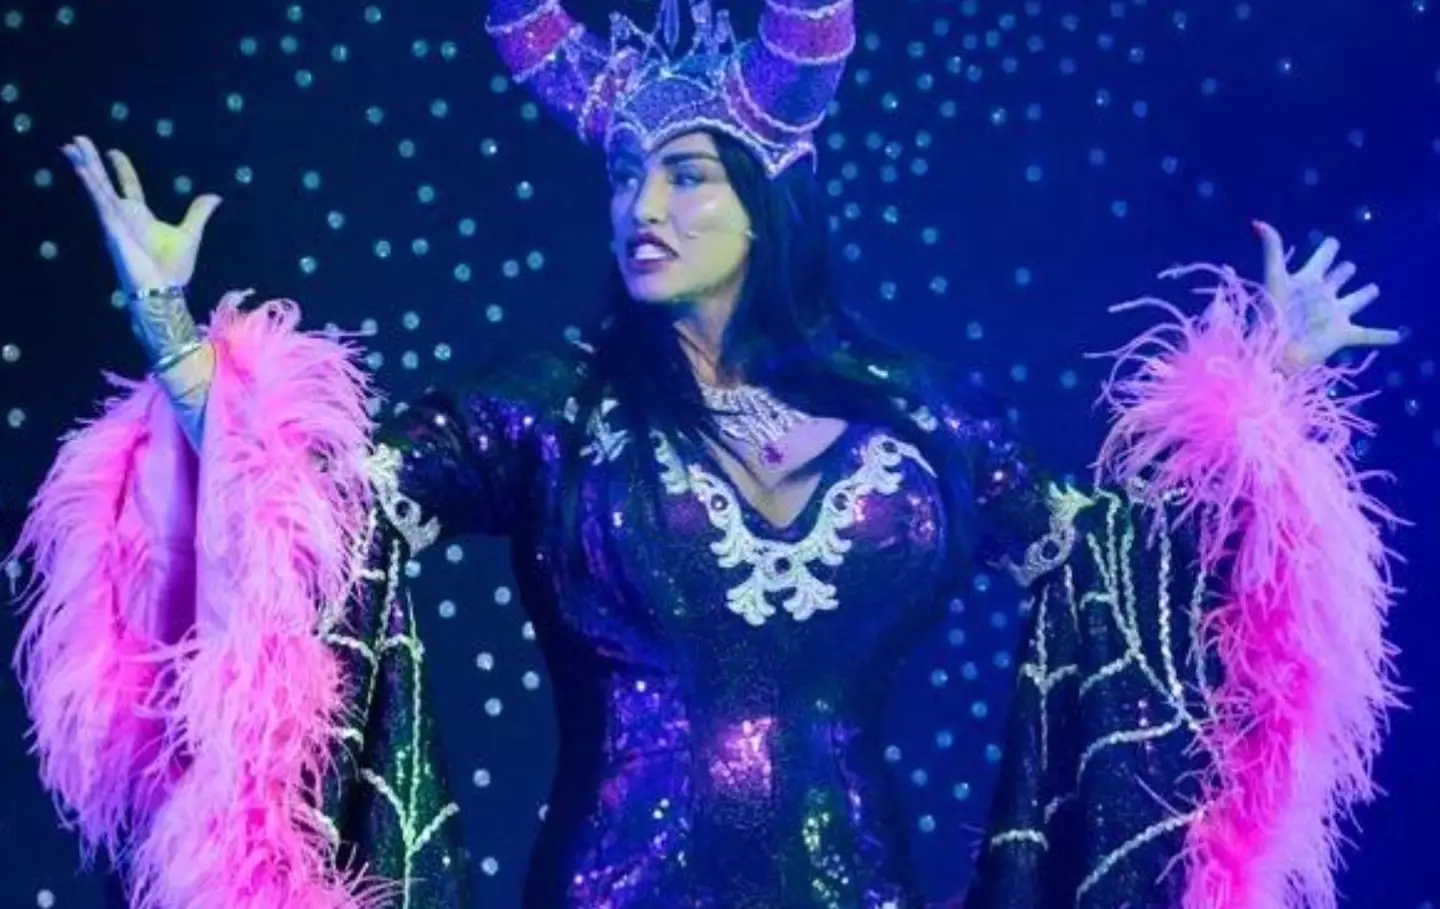 Price stars as The Wicked Fairy Carabosse in the Liverpool panto.